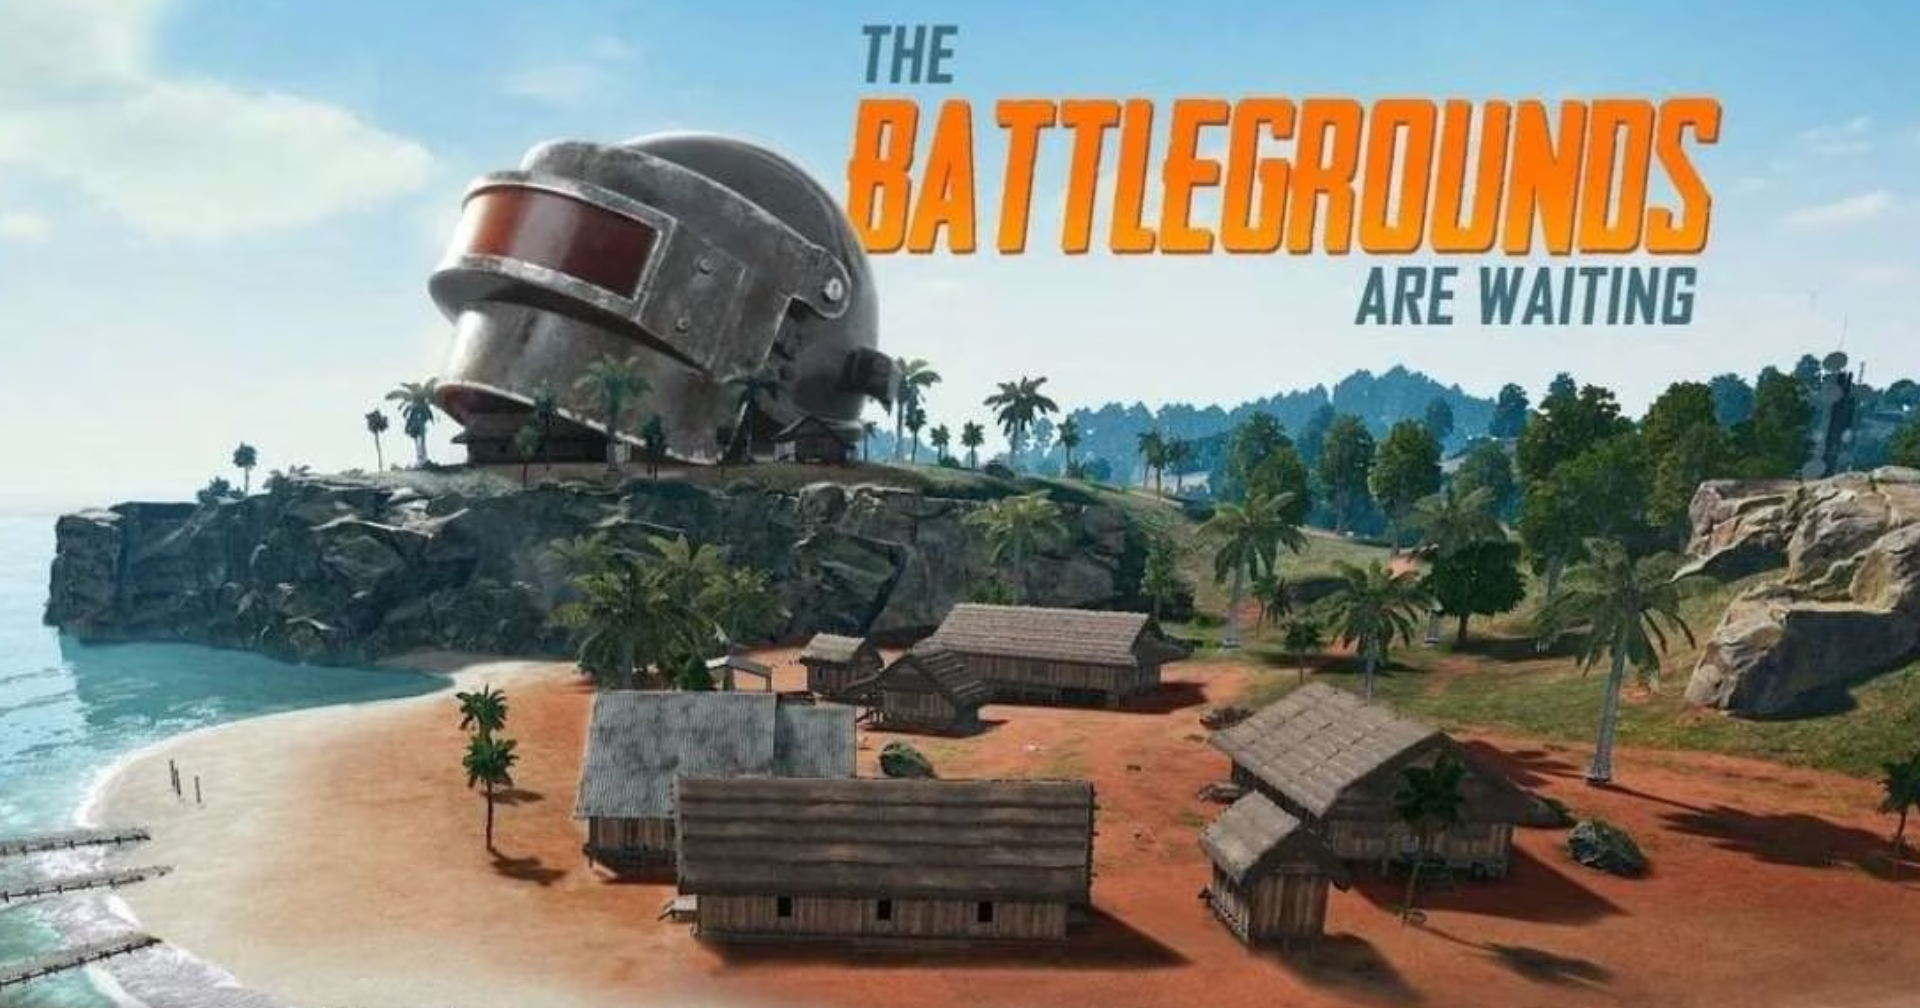 India lifts ban on Battlegrounds Mobile India, approving a 3-month trial period